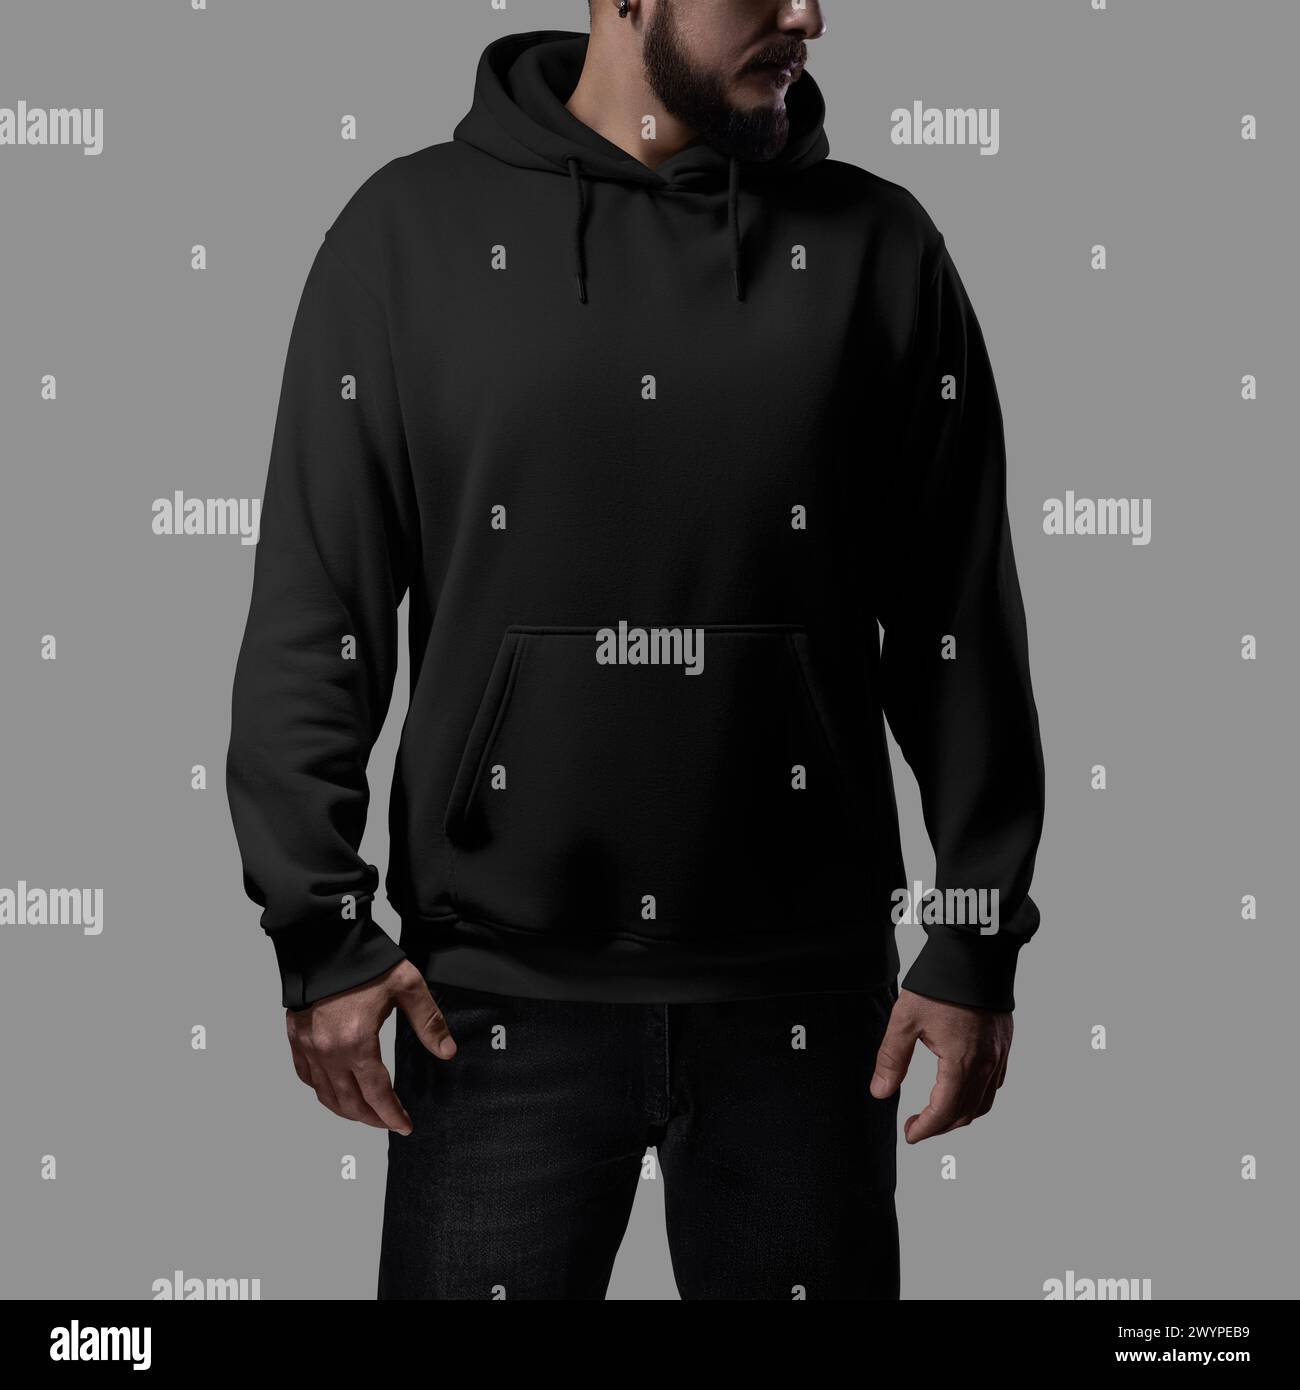 Template of a black oversized hoodie on a bearded man, for design, branding, advertising, front. Casual clothing mockup with laces, cuffs, pocket, hoo Stock Photo